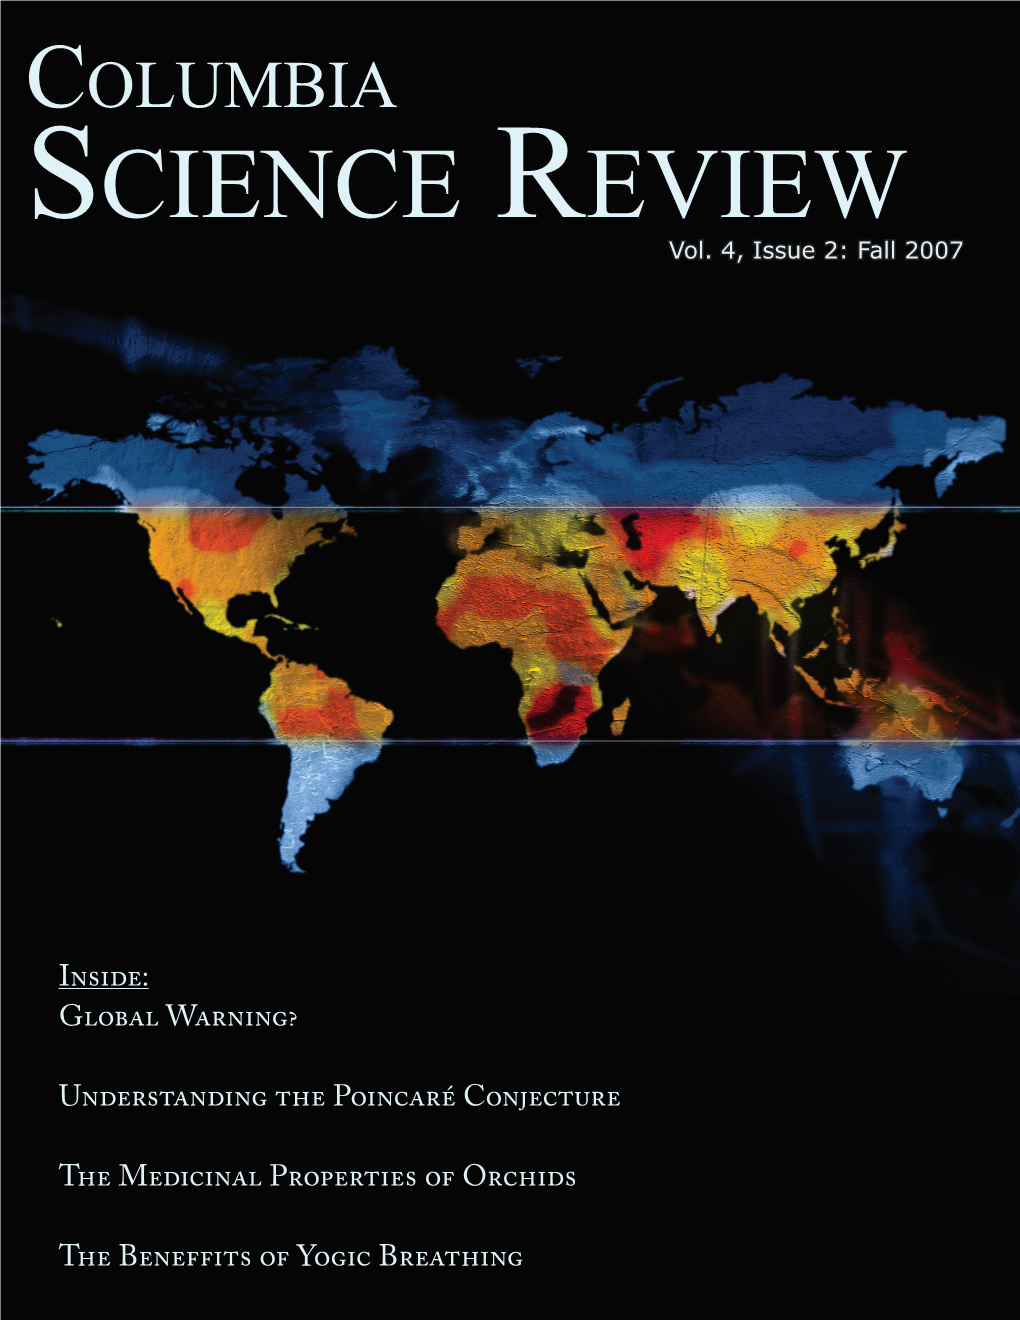 SCIENCE REVIEW Vol